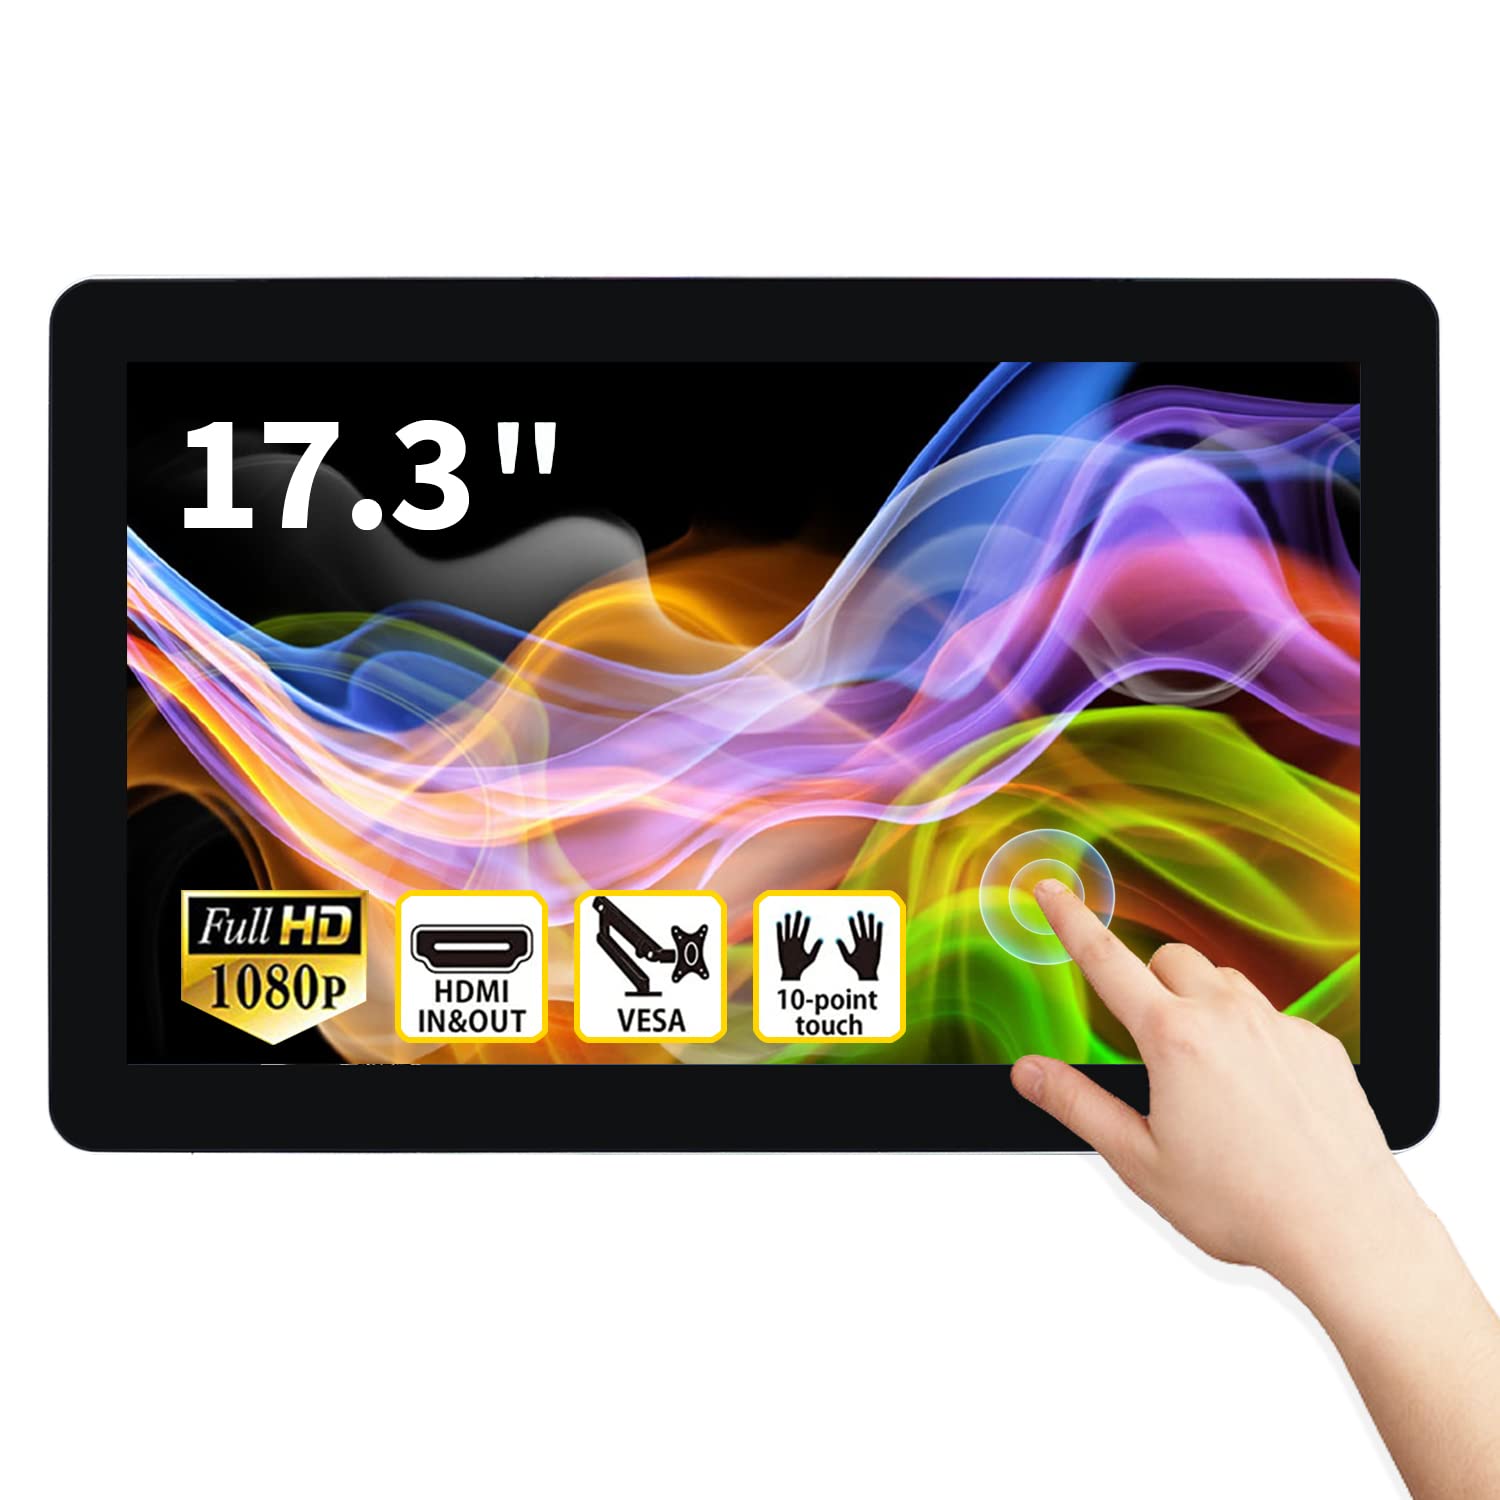 TouchWo 17.3 inch Capacitive Multi-Touch Screen Industrial Monitor, 16:9 Display 1920 x 1080P, Built-in Speakers, VGA & HDMI Monitor for PC, POS, Small Business, Restaurant, Bar